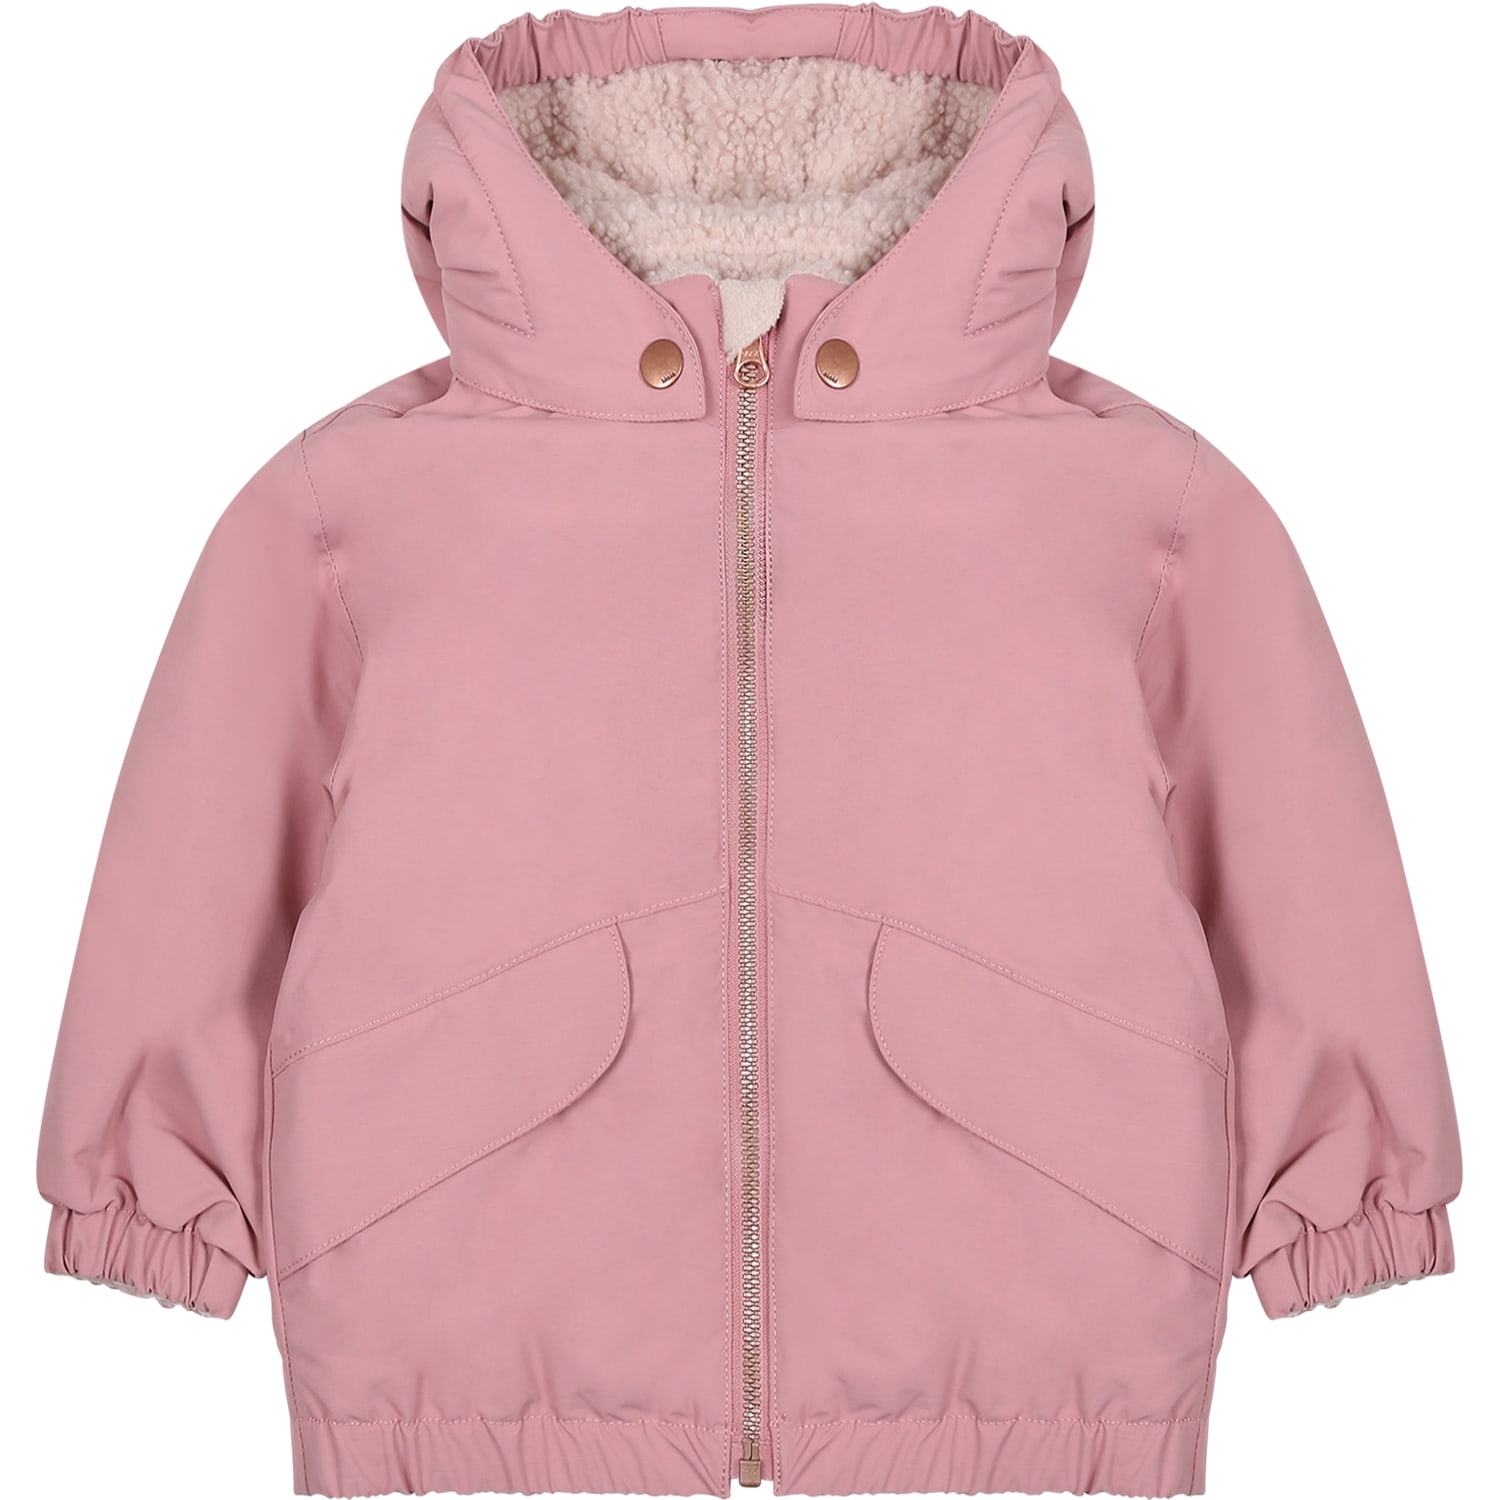 MOLO PINK JACKET FOR BABY GIRL WITH LOGO